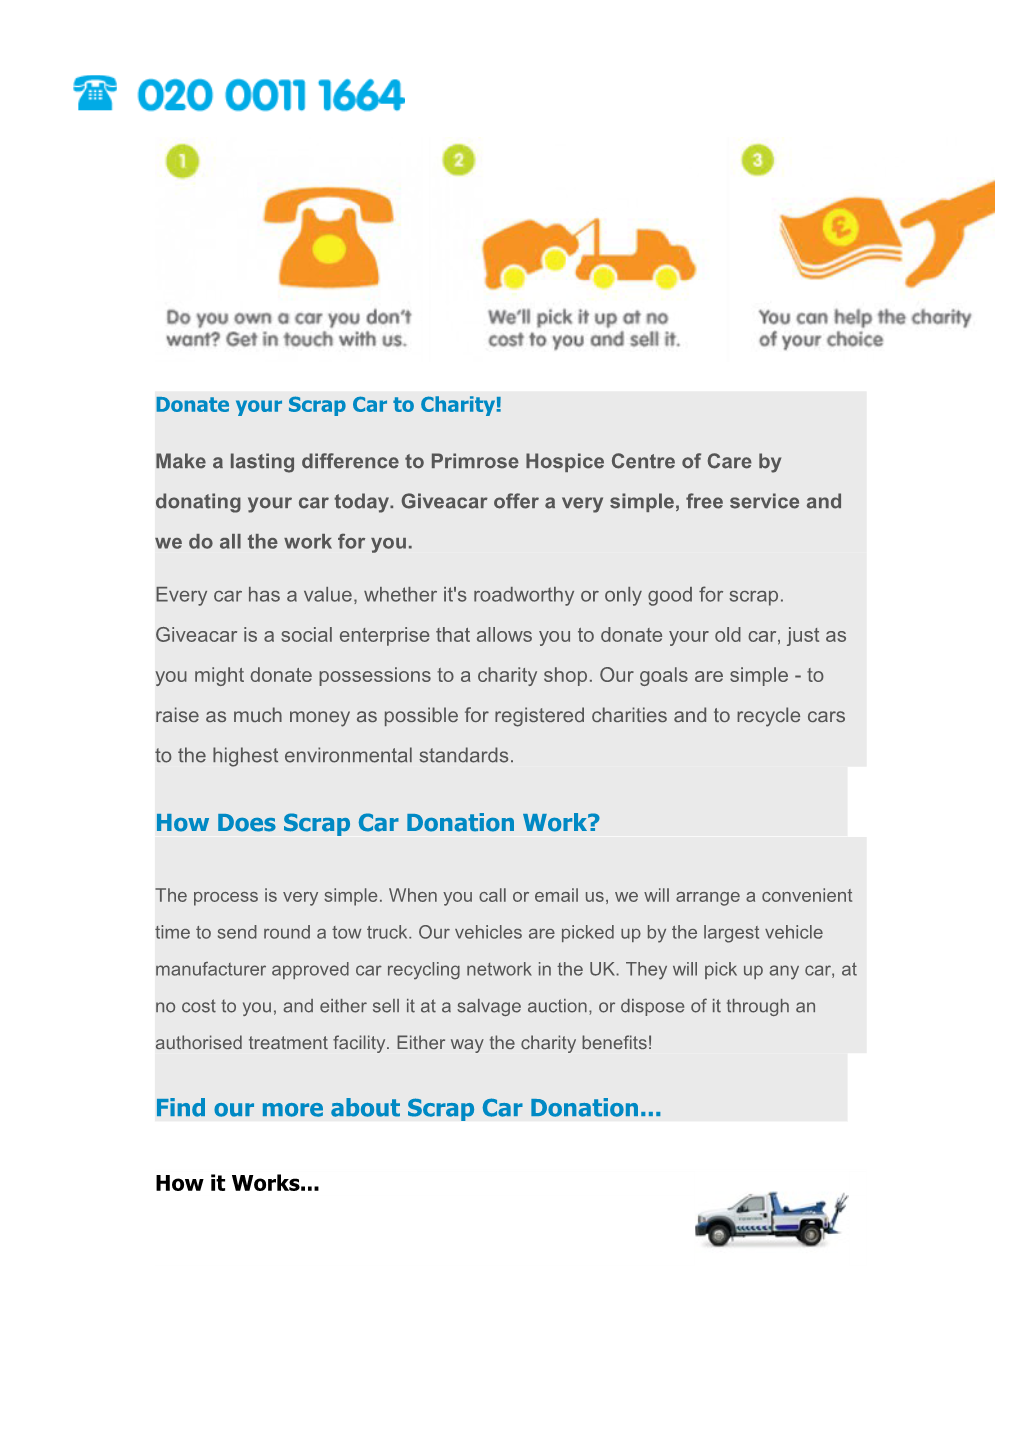 Donate Your Scrap Car to Charity!